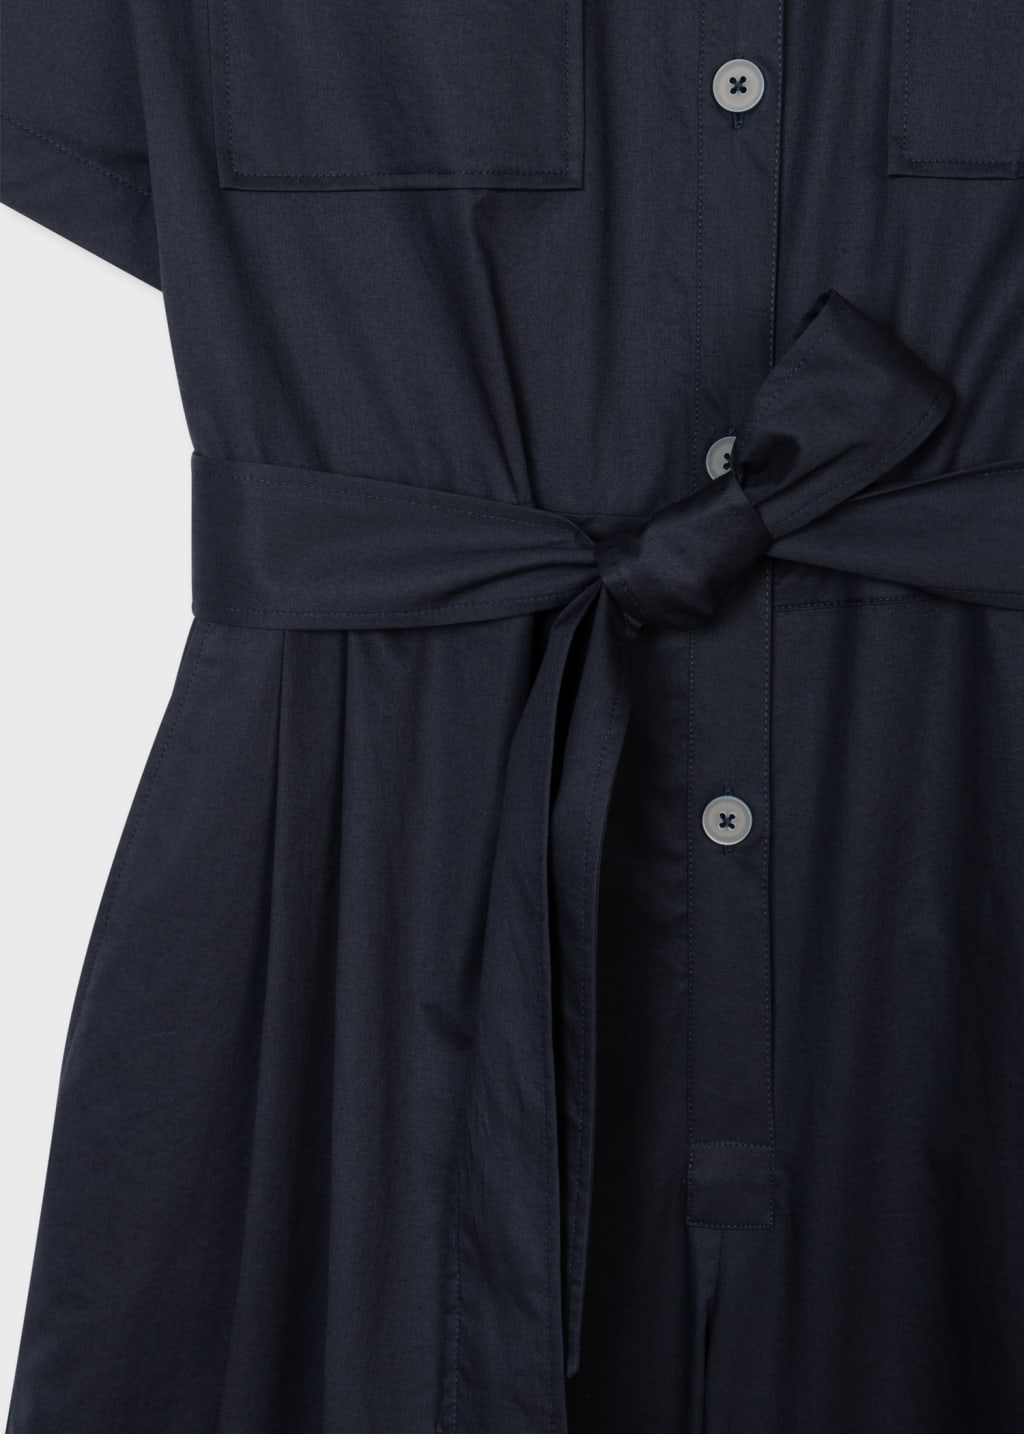 Model View -Women's Navy Cotton Playsuit by Paul Smith